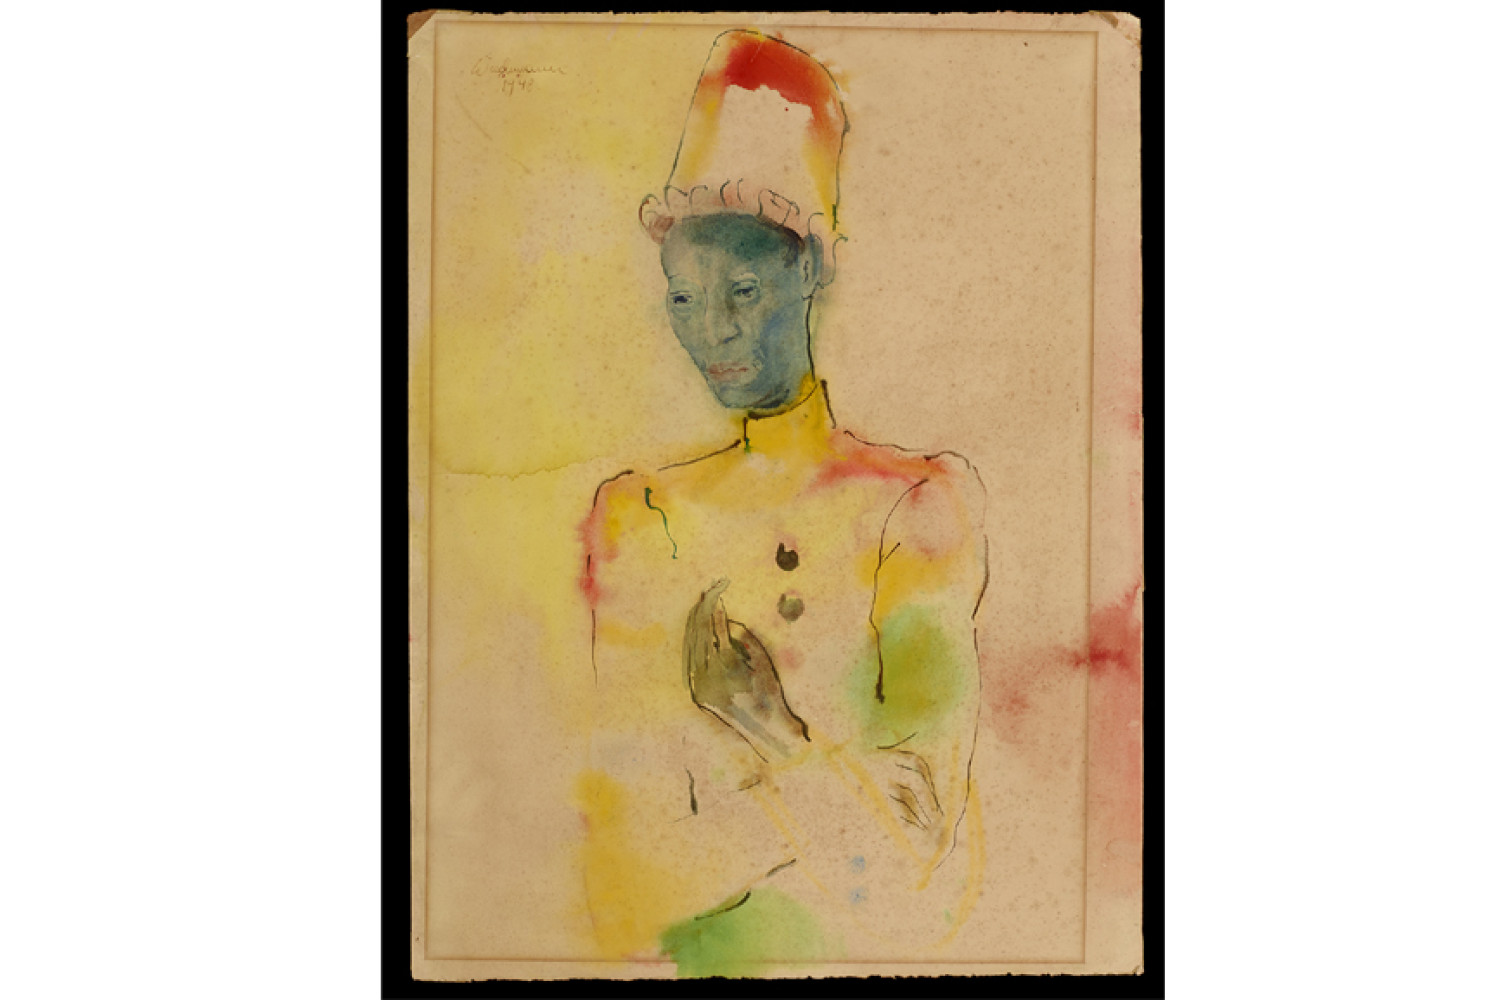 Untitled (Figure at Carnival), 1948, by Guillermo Wiedemann (Columbian, 1905-1969); watercolor on paper; 31 1/2 x 23 5/8 inches; Courtesy of the Lowe Art Museum, University of Miami